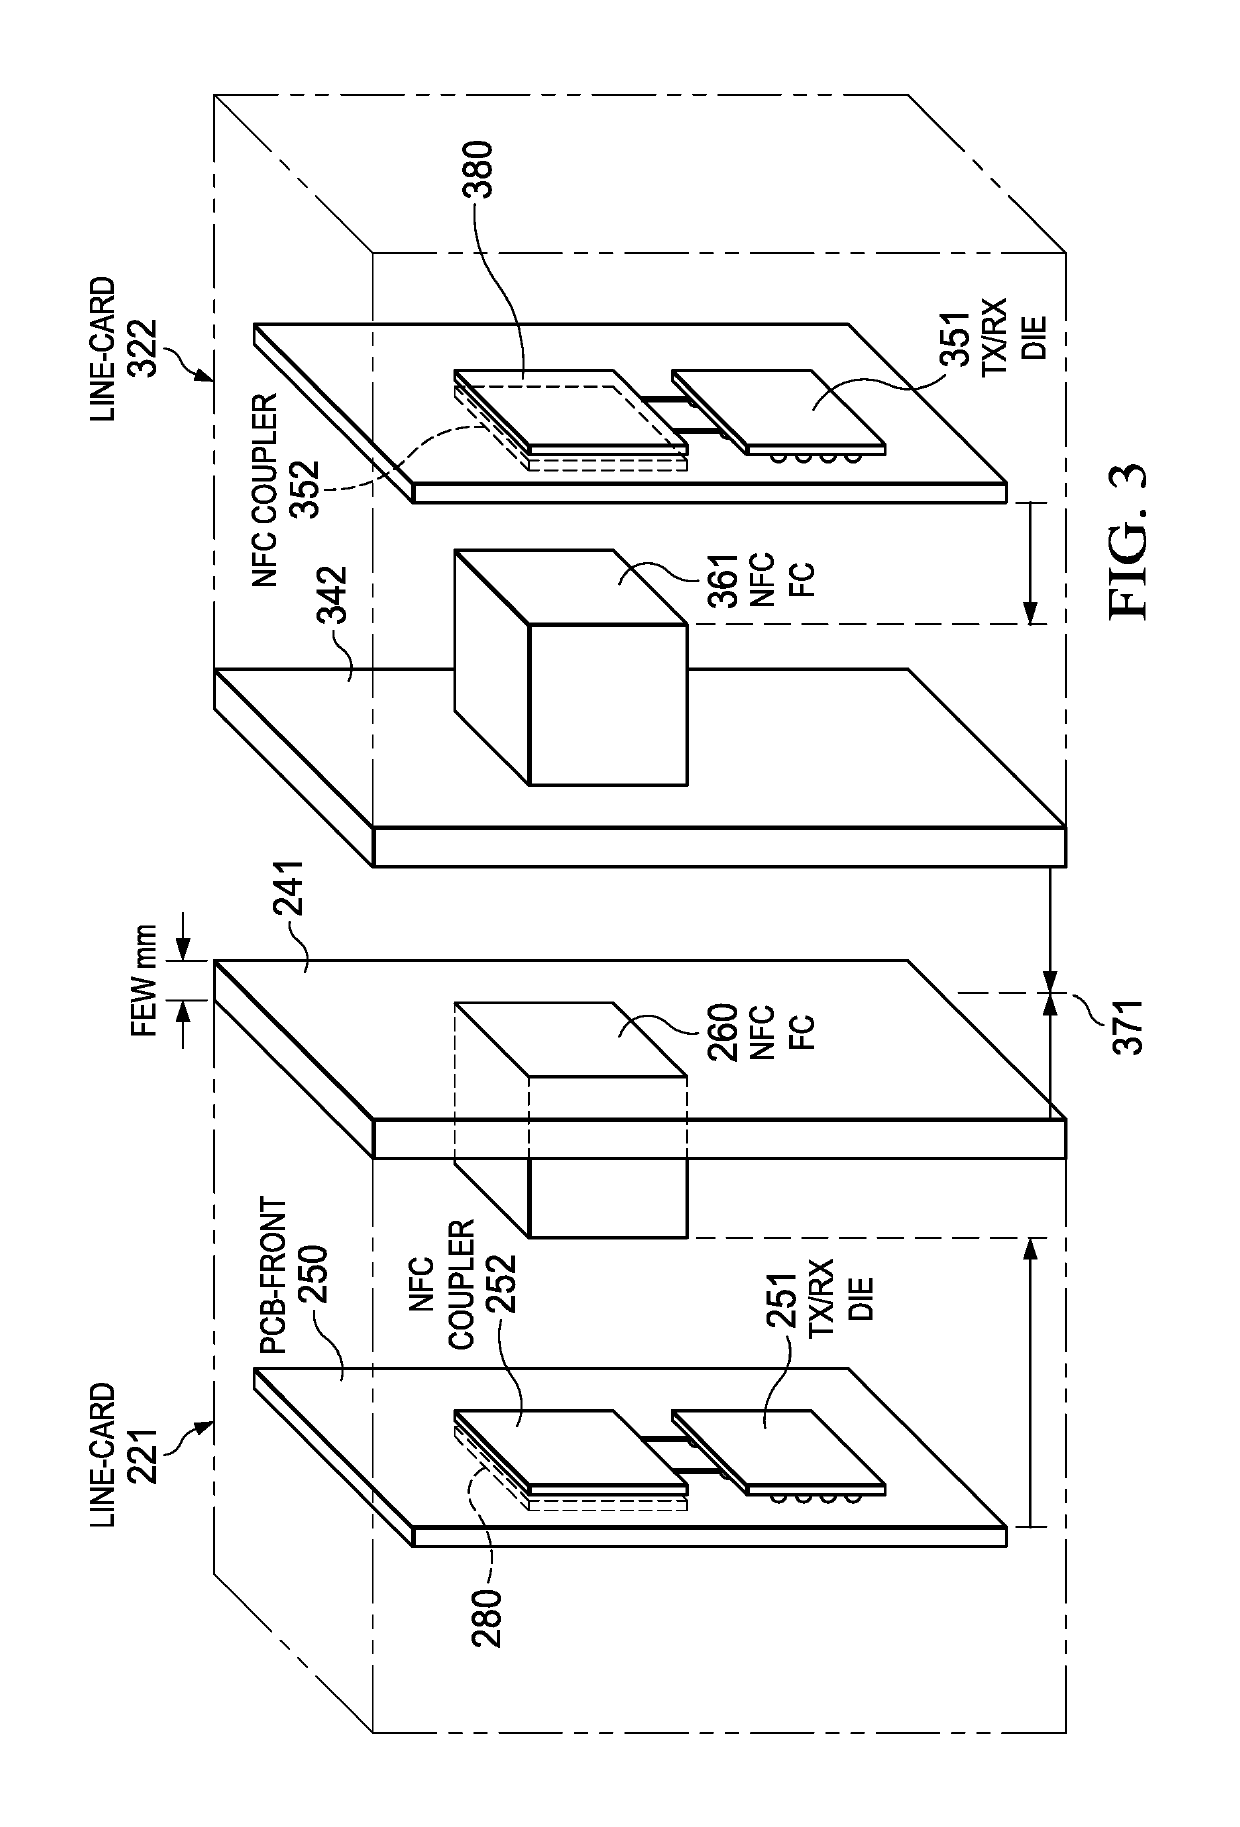 Integrated artificial magnetic launch surface for near field communication system